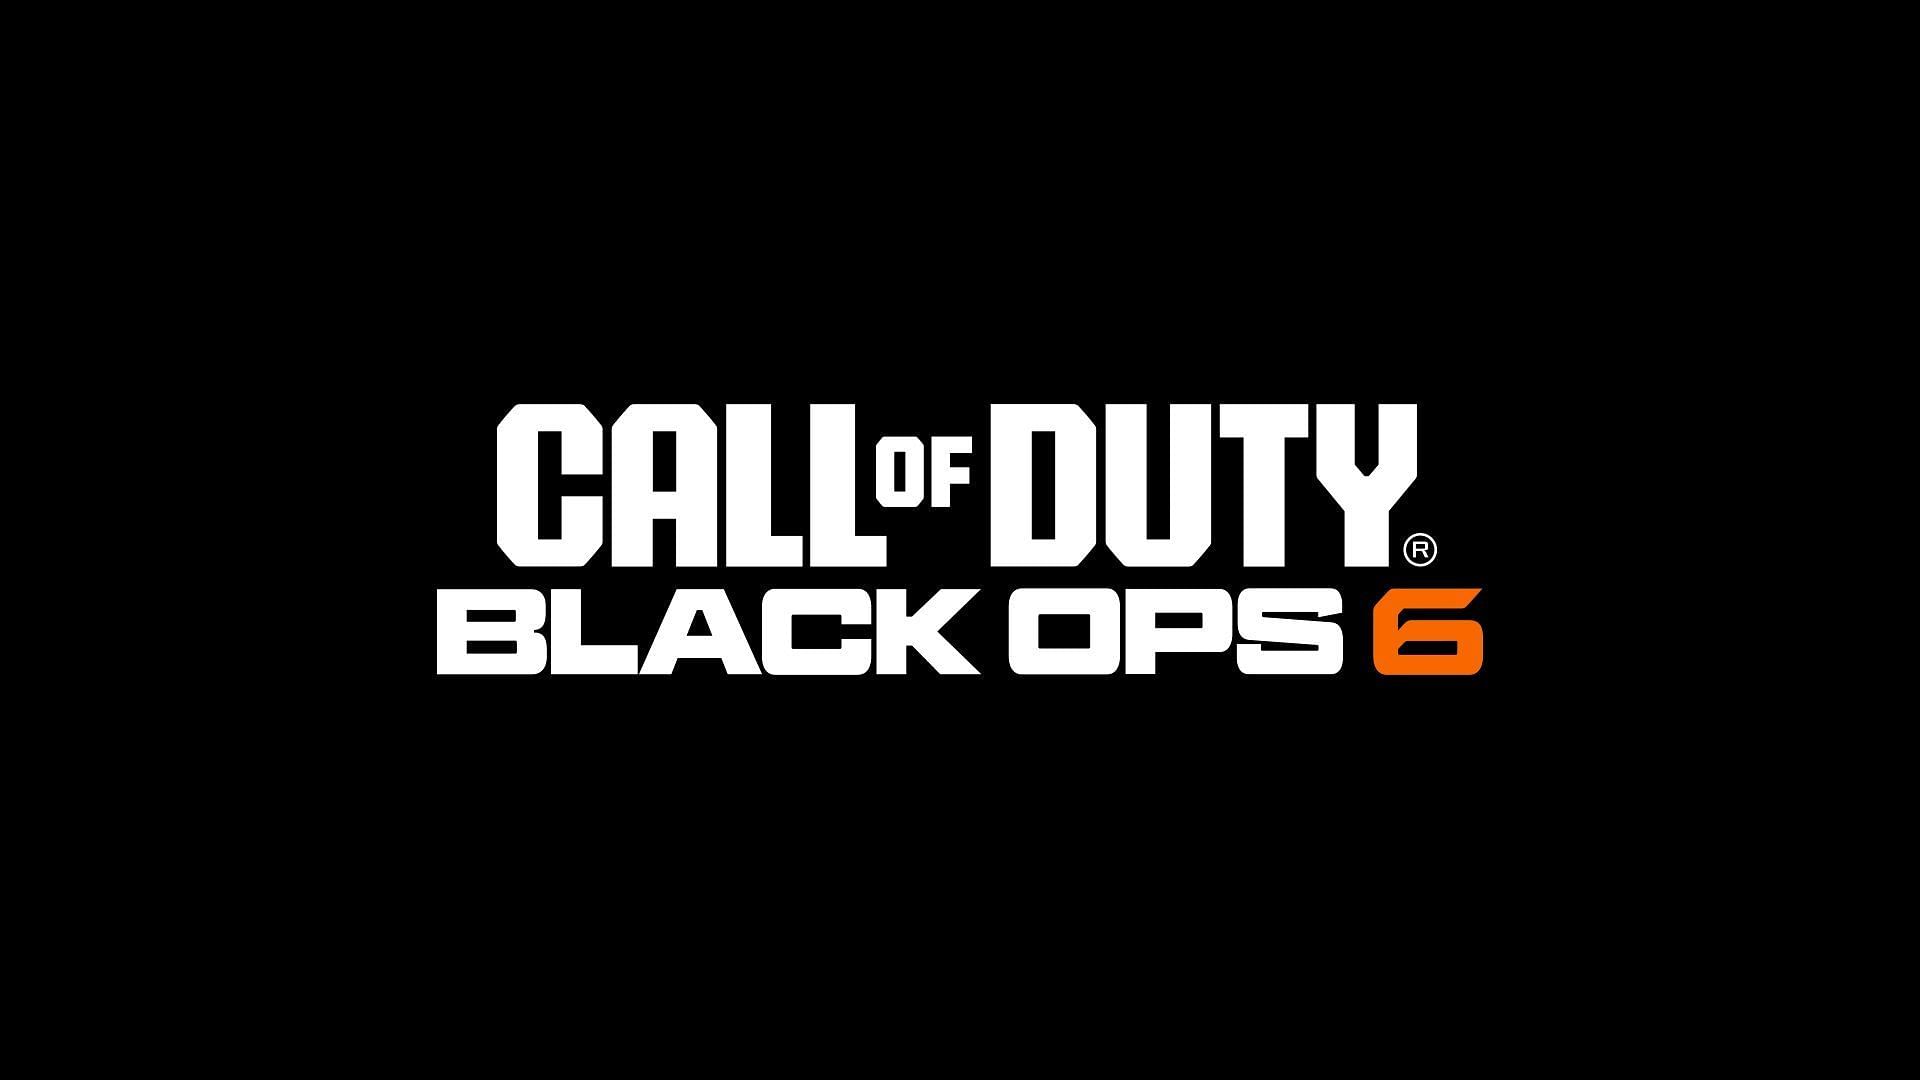 CoD 2024 Black Ops is rumored to release later this year on October 25 (Image via Activision)